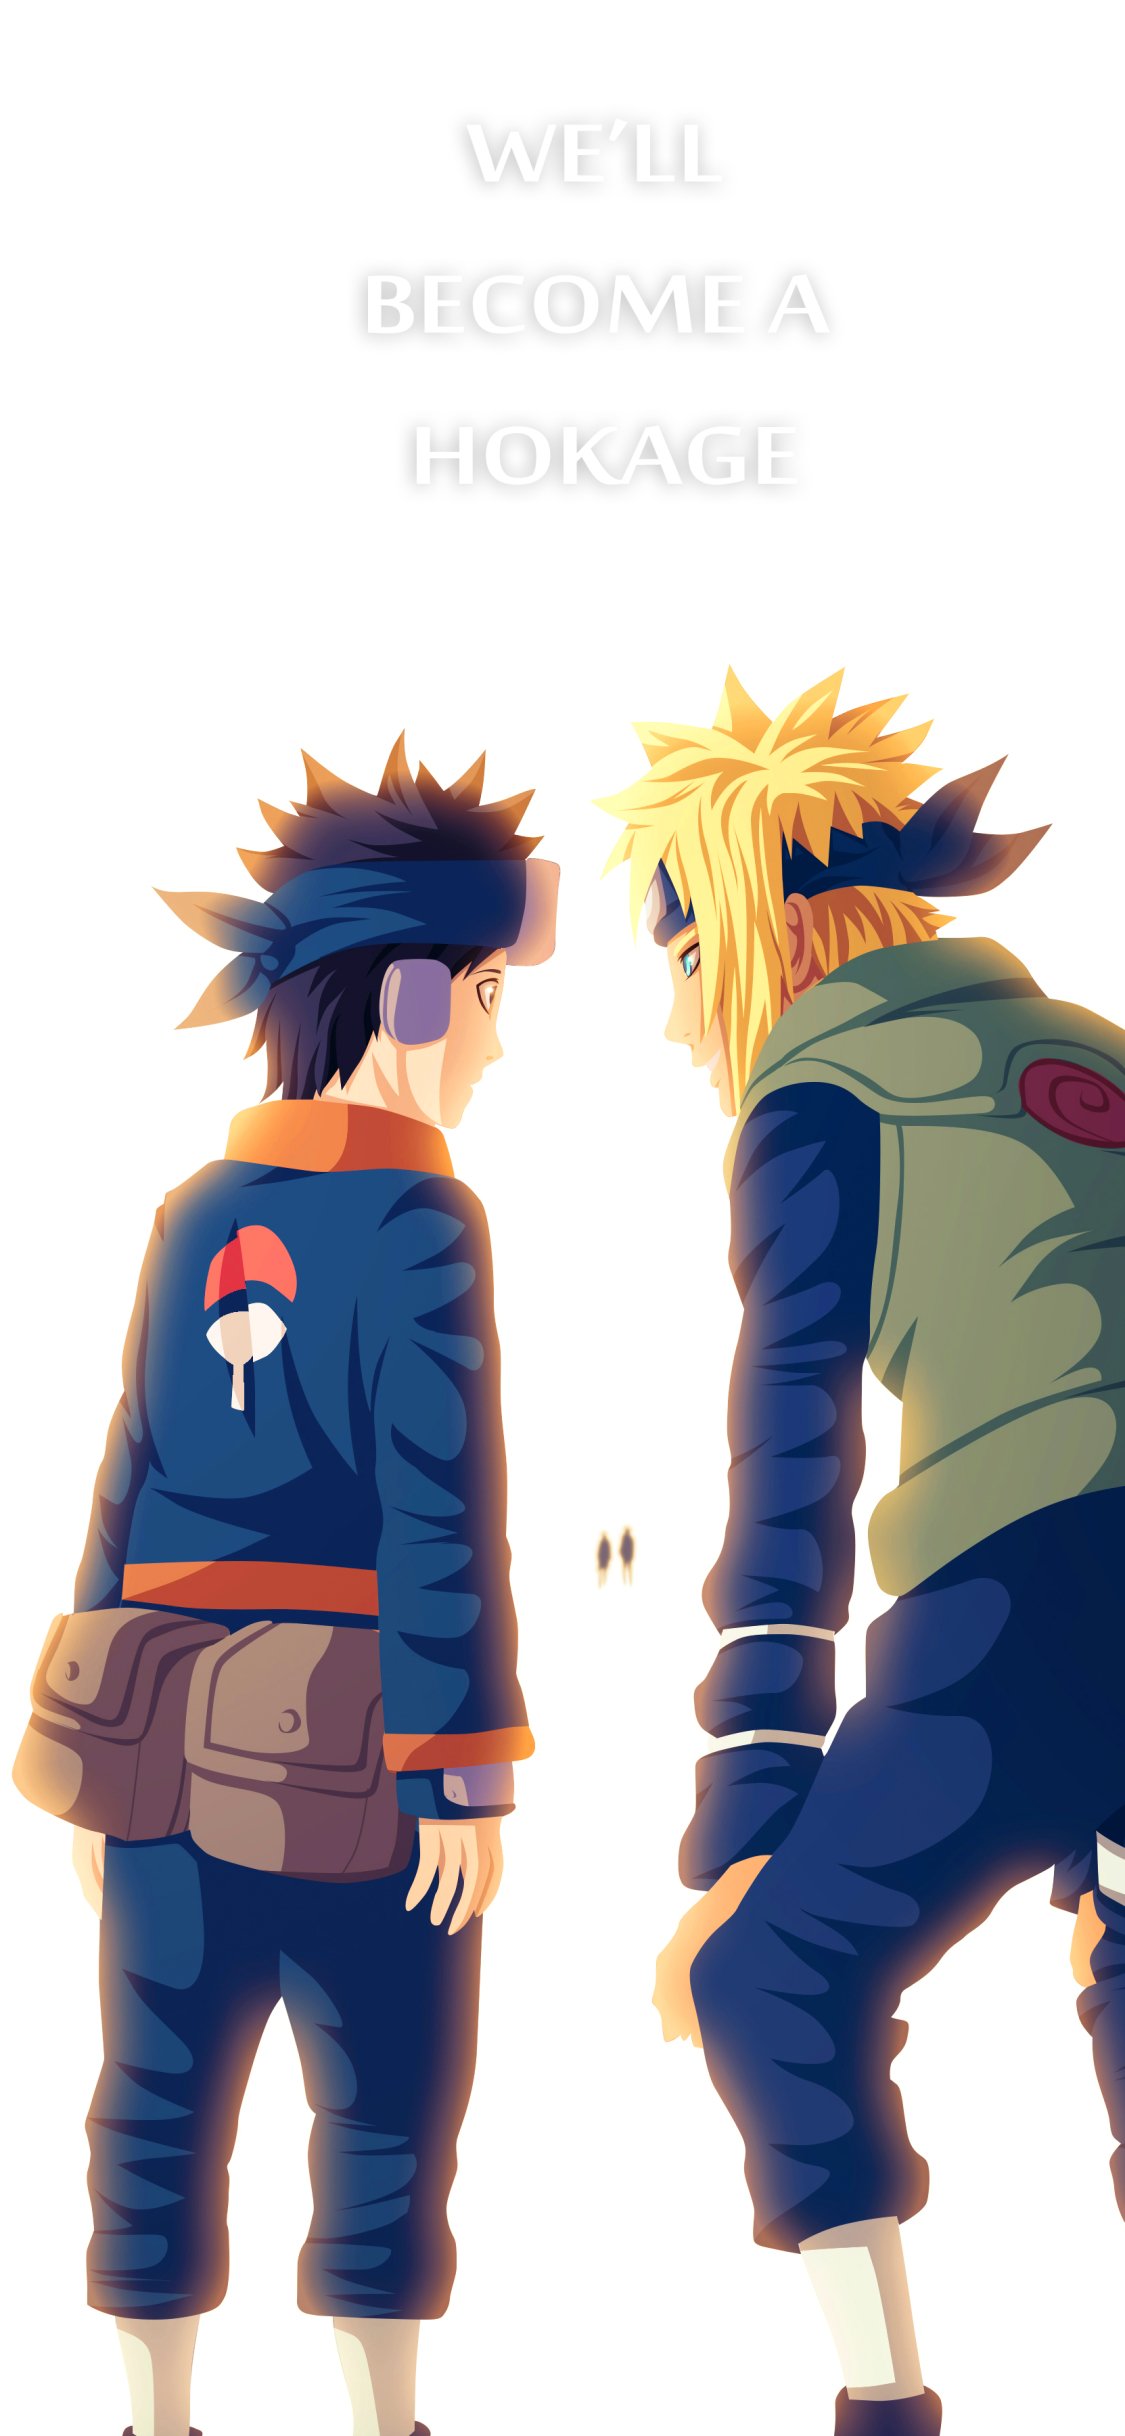 We'll become a Hokage! Right Obito?